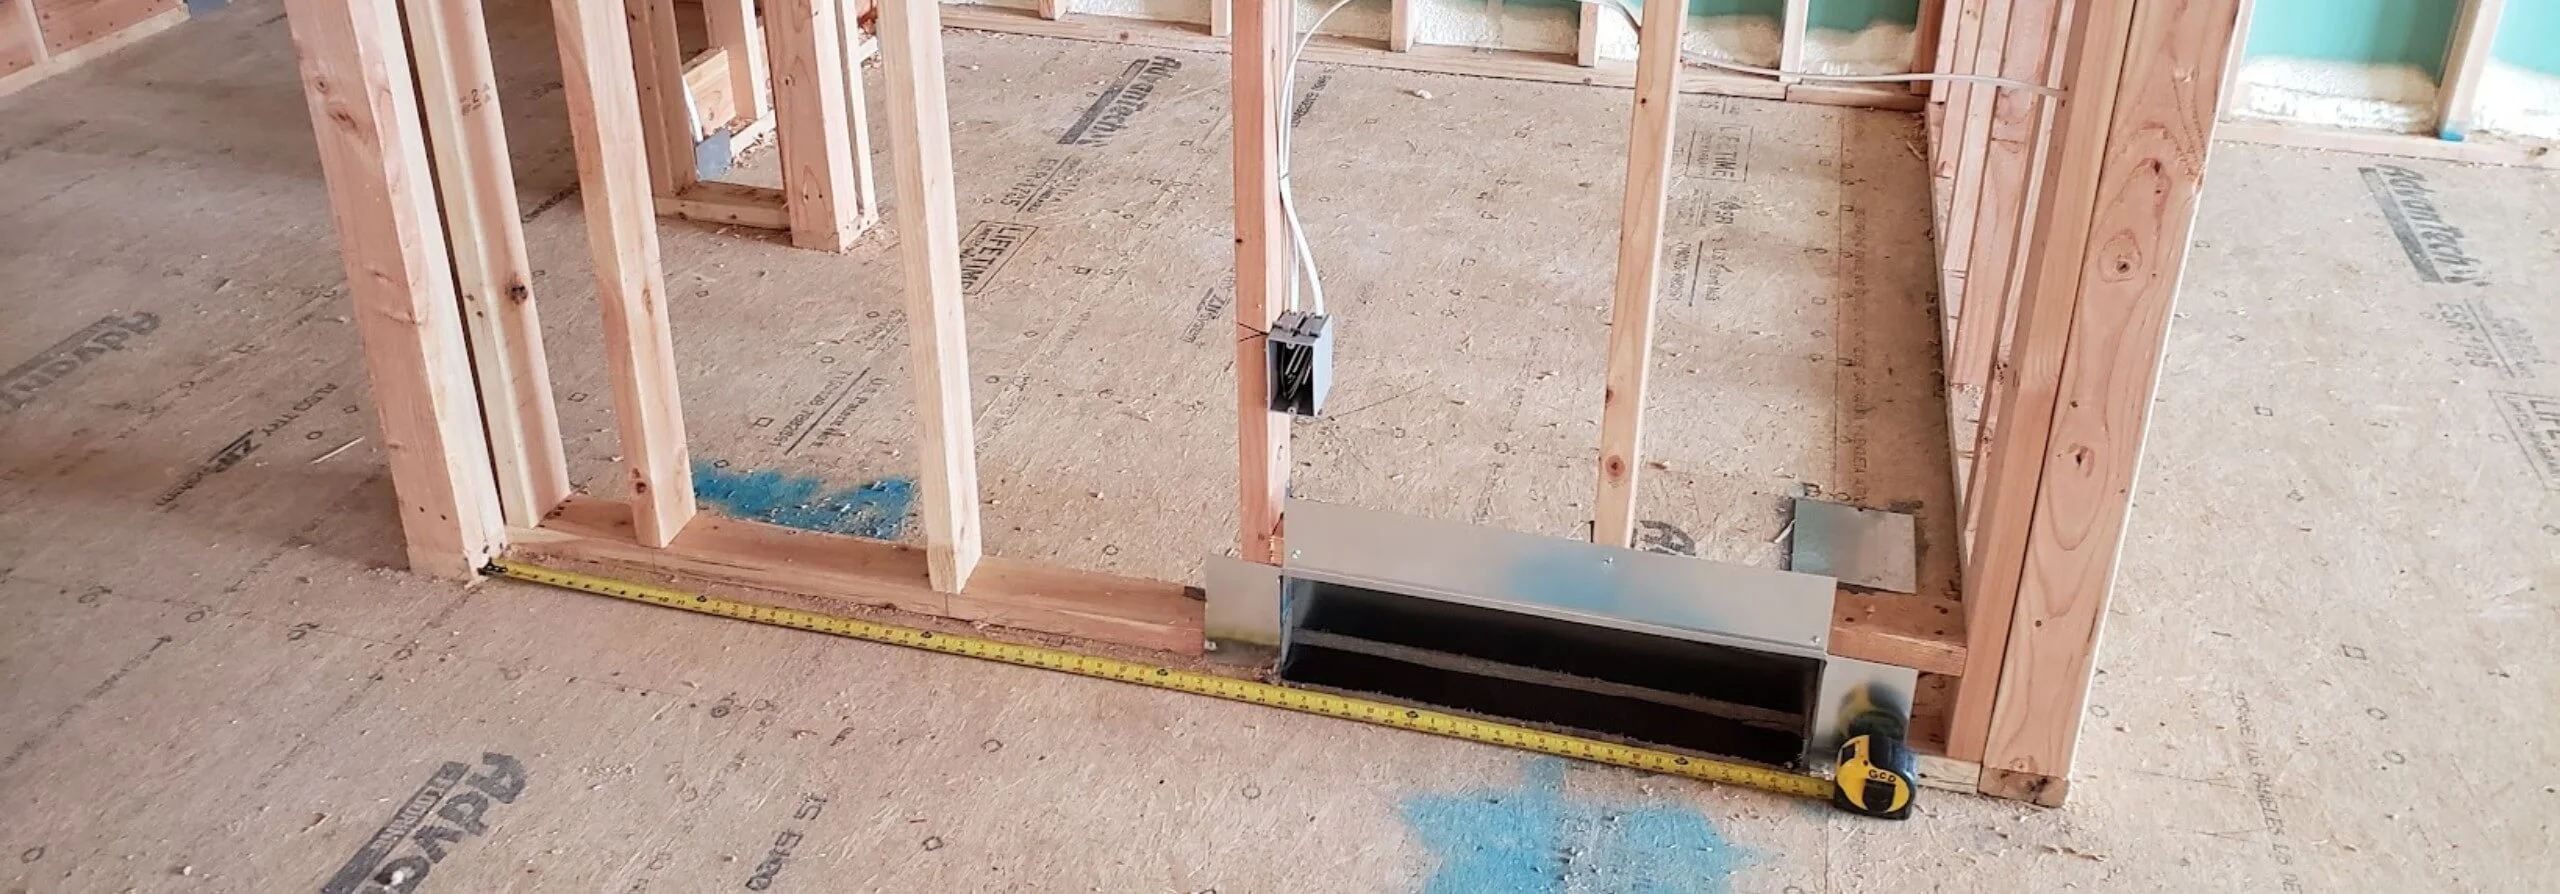 Tape Measure in New Construction